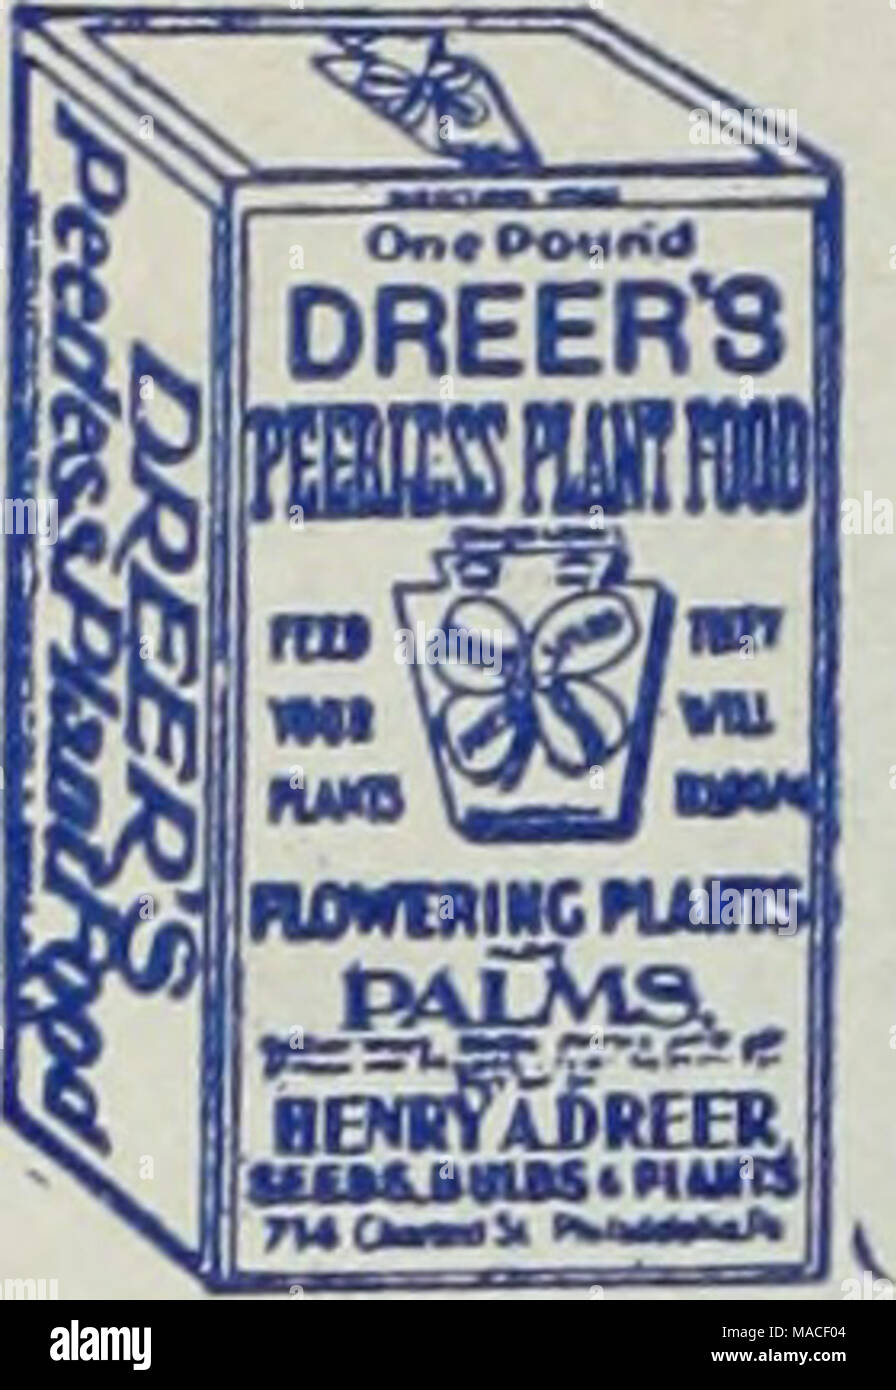 . Dreer's wholesale price list / Henry A. Dreer. . Dreer's Peerless Plant Food, i lb. Coarse Bone. 200 lbs., $4.00; ton, ;833.oo. boxes, 15 cts. each ; gl.50 per doz.; $12.00 Button Bone. 200 lbs., $3.50; ton, $30.00. per 100; retails at 25 cts. Pulverized Sheep Manure. Only one brand, the be.st. Dreer s Peerless Lawn and Garden . 100 lb. sack, $2.00; ton, $32.00. Dressing. 25 lbs. 75 cts.; 100 lbs. $2.50 ; Nitrate of Soda. 50 lbs., 51.75 ; 100 lbs., 200 lbs. $4.50 ; ton, $45.00. $5-SO; prices for large lots on application. Pure Bone Meal. loolbs., $2.00 ; 2oo-lb. Clay's Fertilizer. In origina Stock Photo